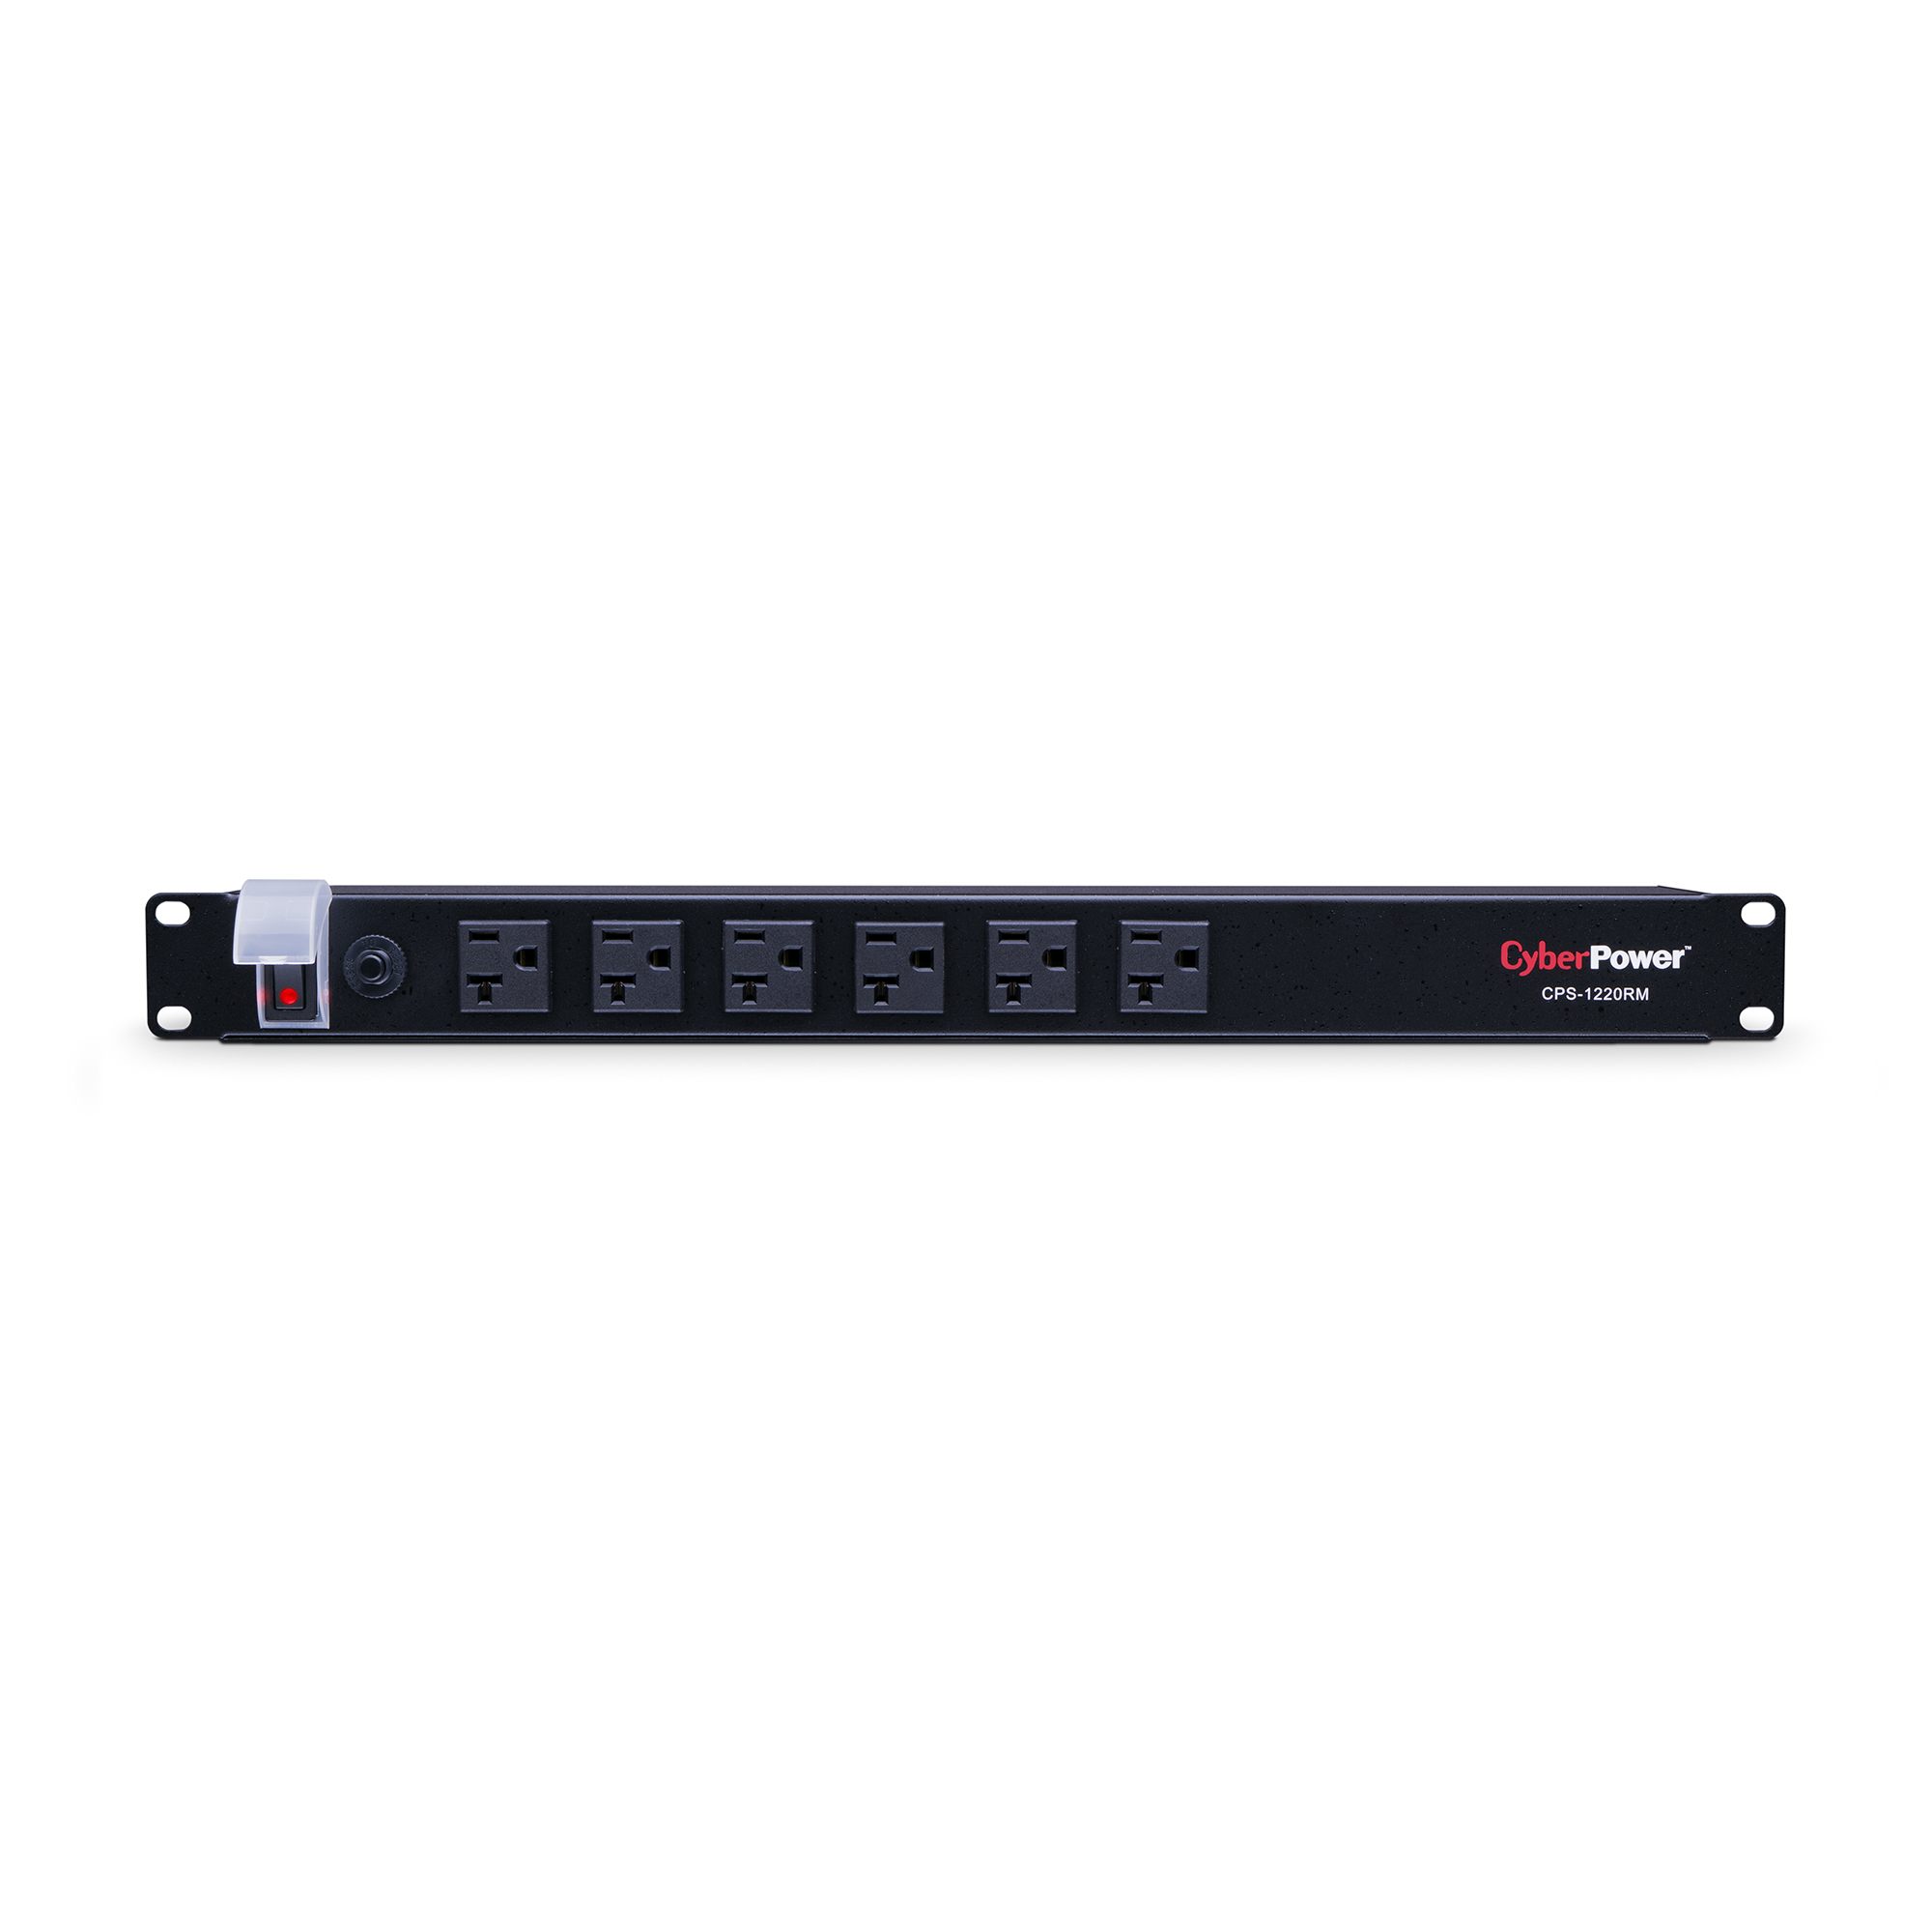 100-125V/20A CyberPower PDU20M2F12R Metered PDU 14 Outlets 1U Rackmount 